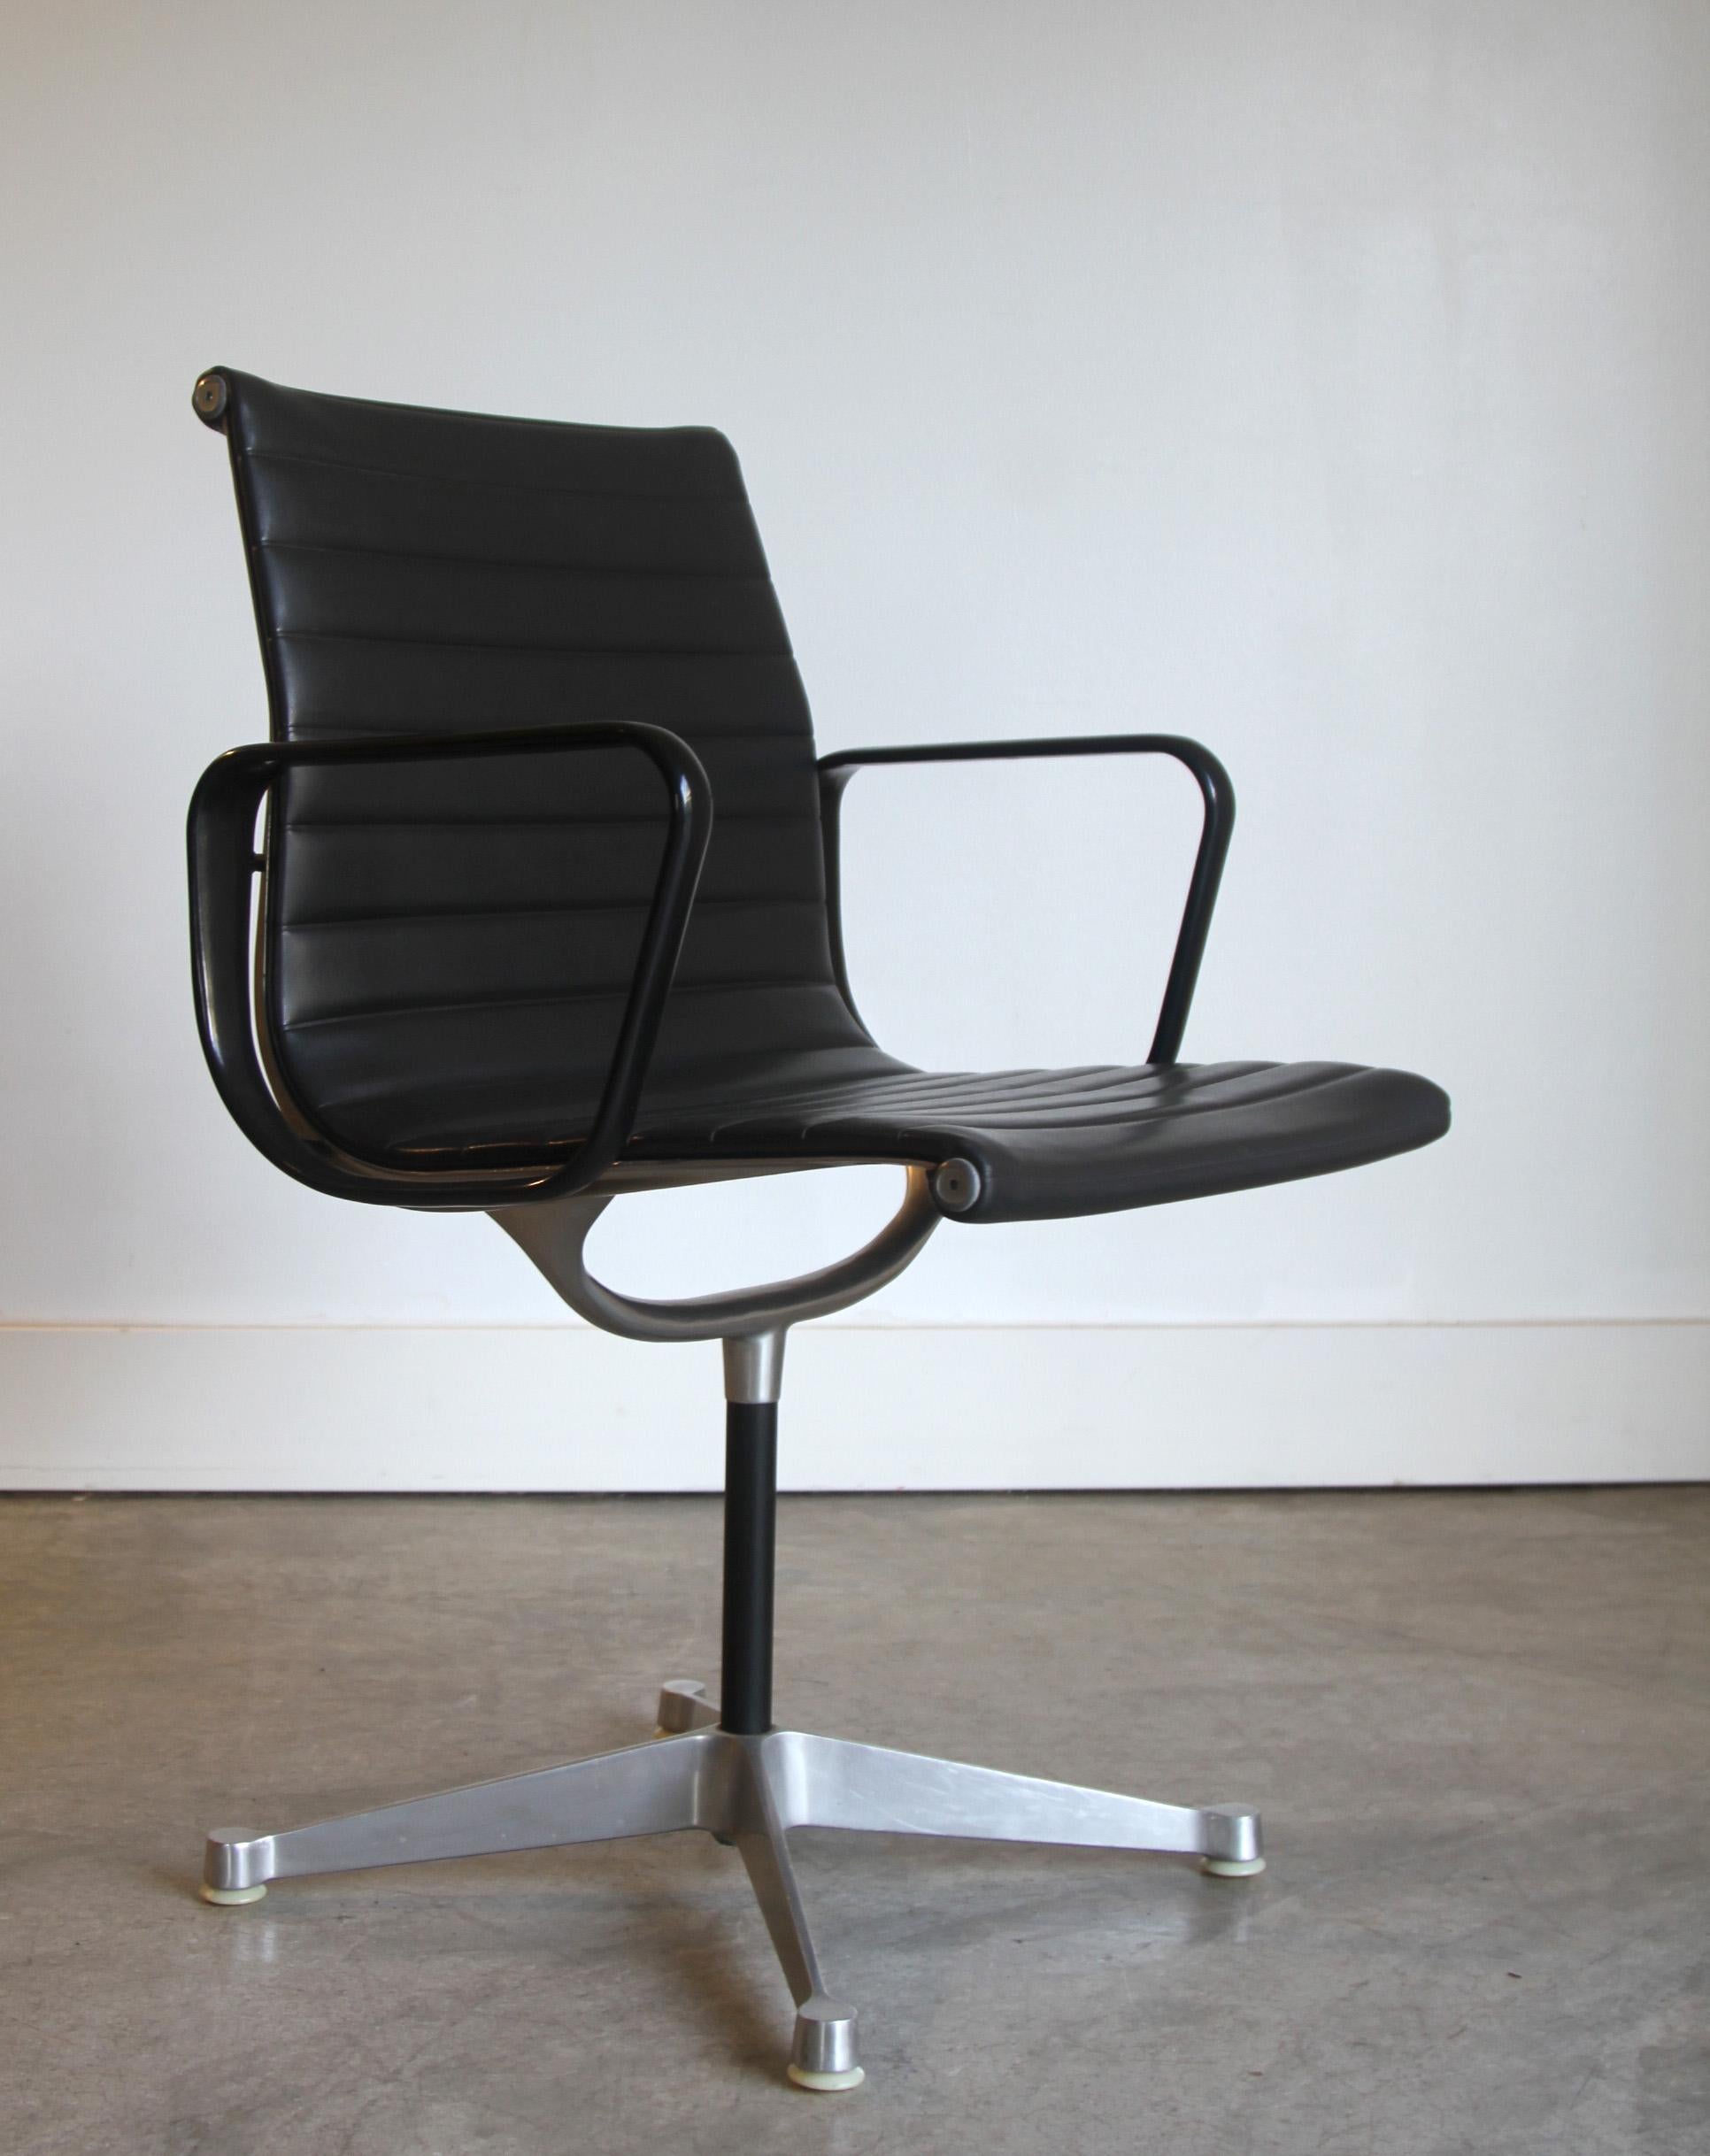 Designer: Charles + Ray Eames 
Period/style: Mid-Century Modern
Country: US
Date: 1970s.